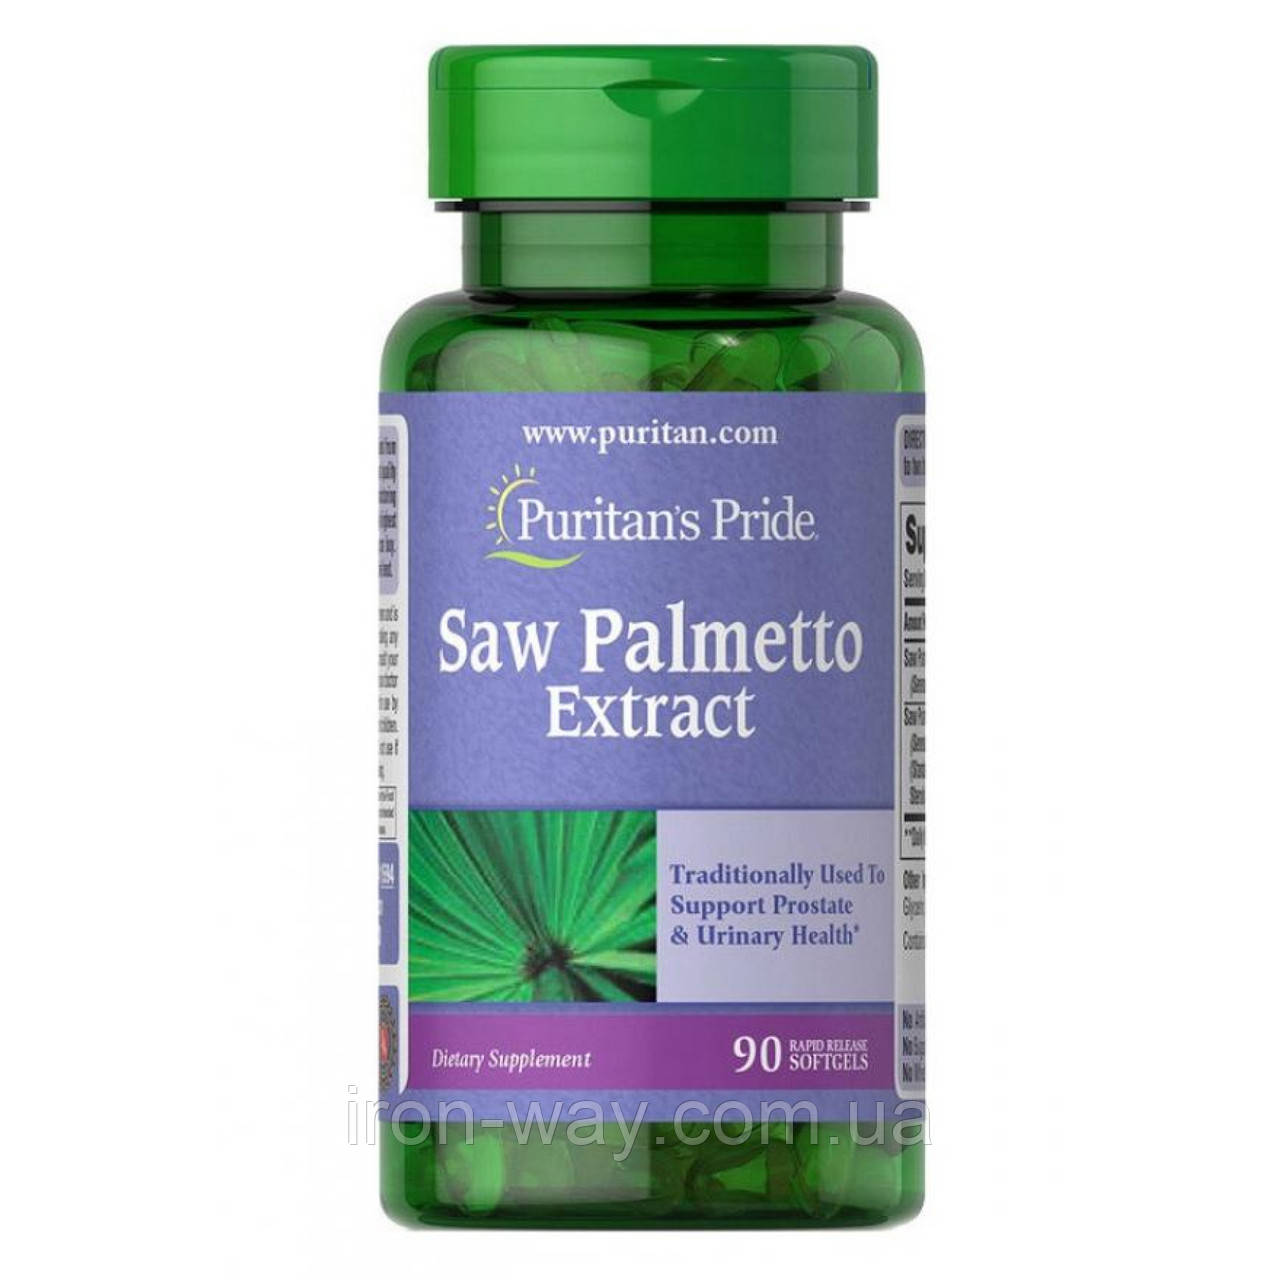 Saw Palmetto Extract - 90 Softgels - фото 1 - id-p2100931134